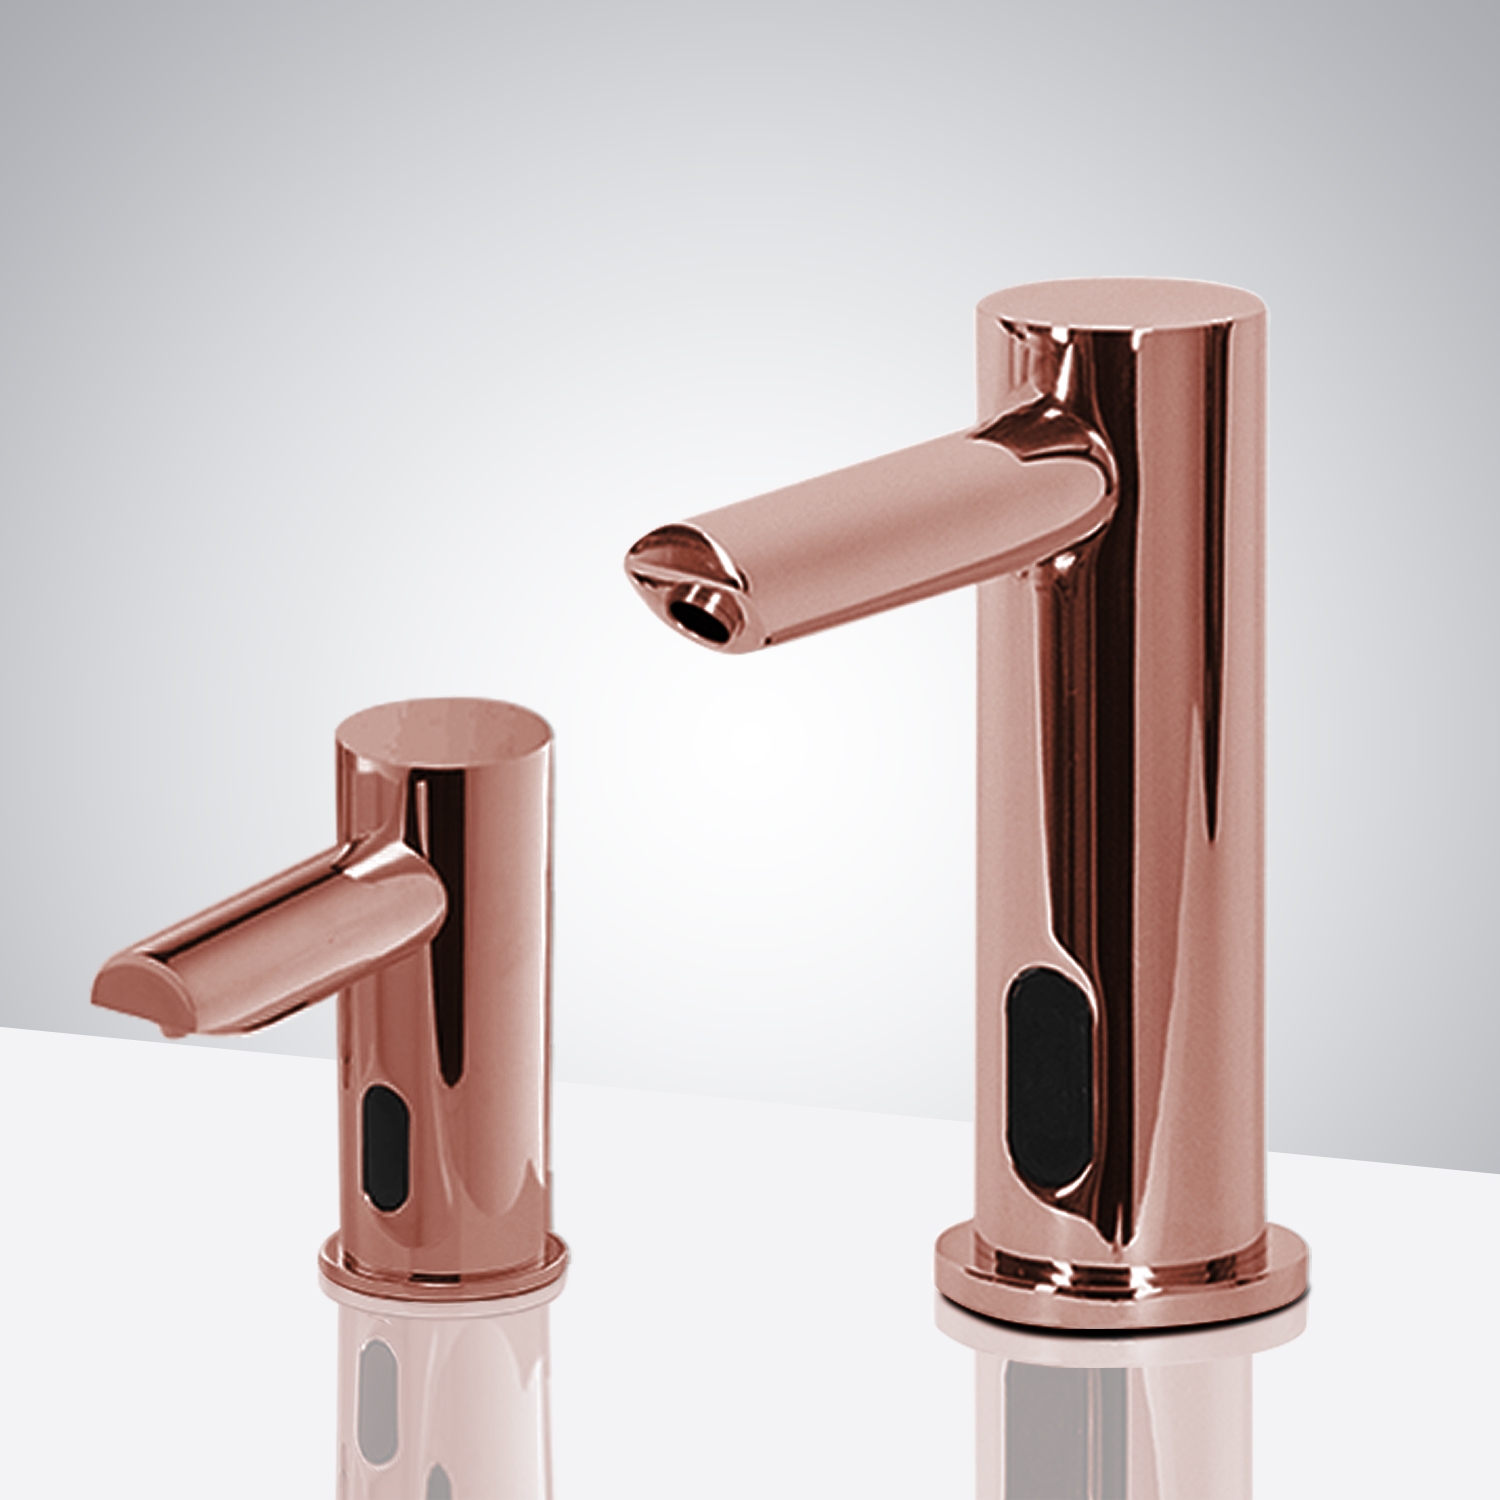 Fontana Rose Gold Commercial Automatic Dual Touchless Sensor Faucet And Soap Dispenser